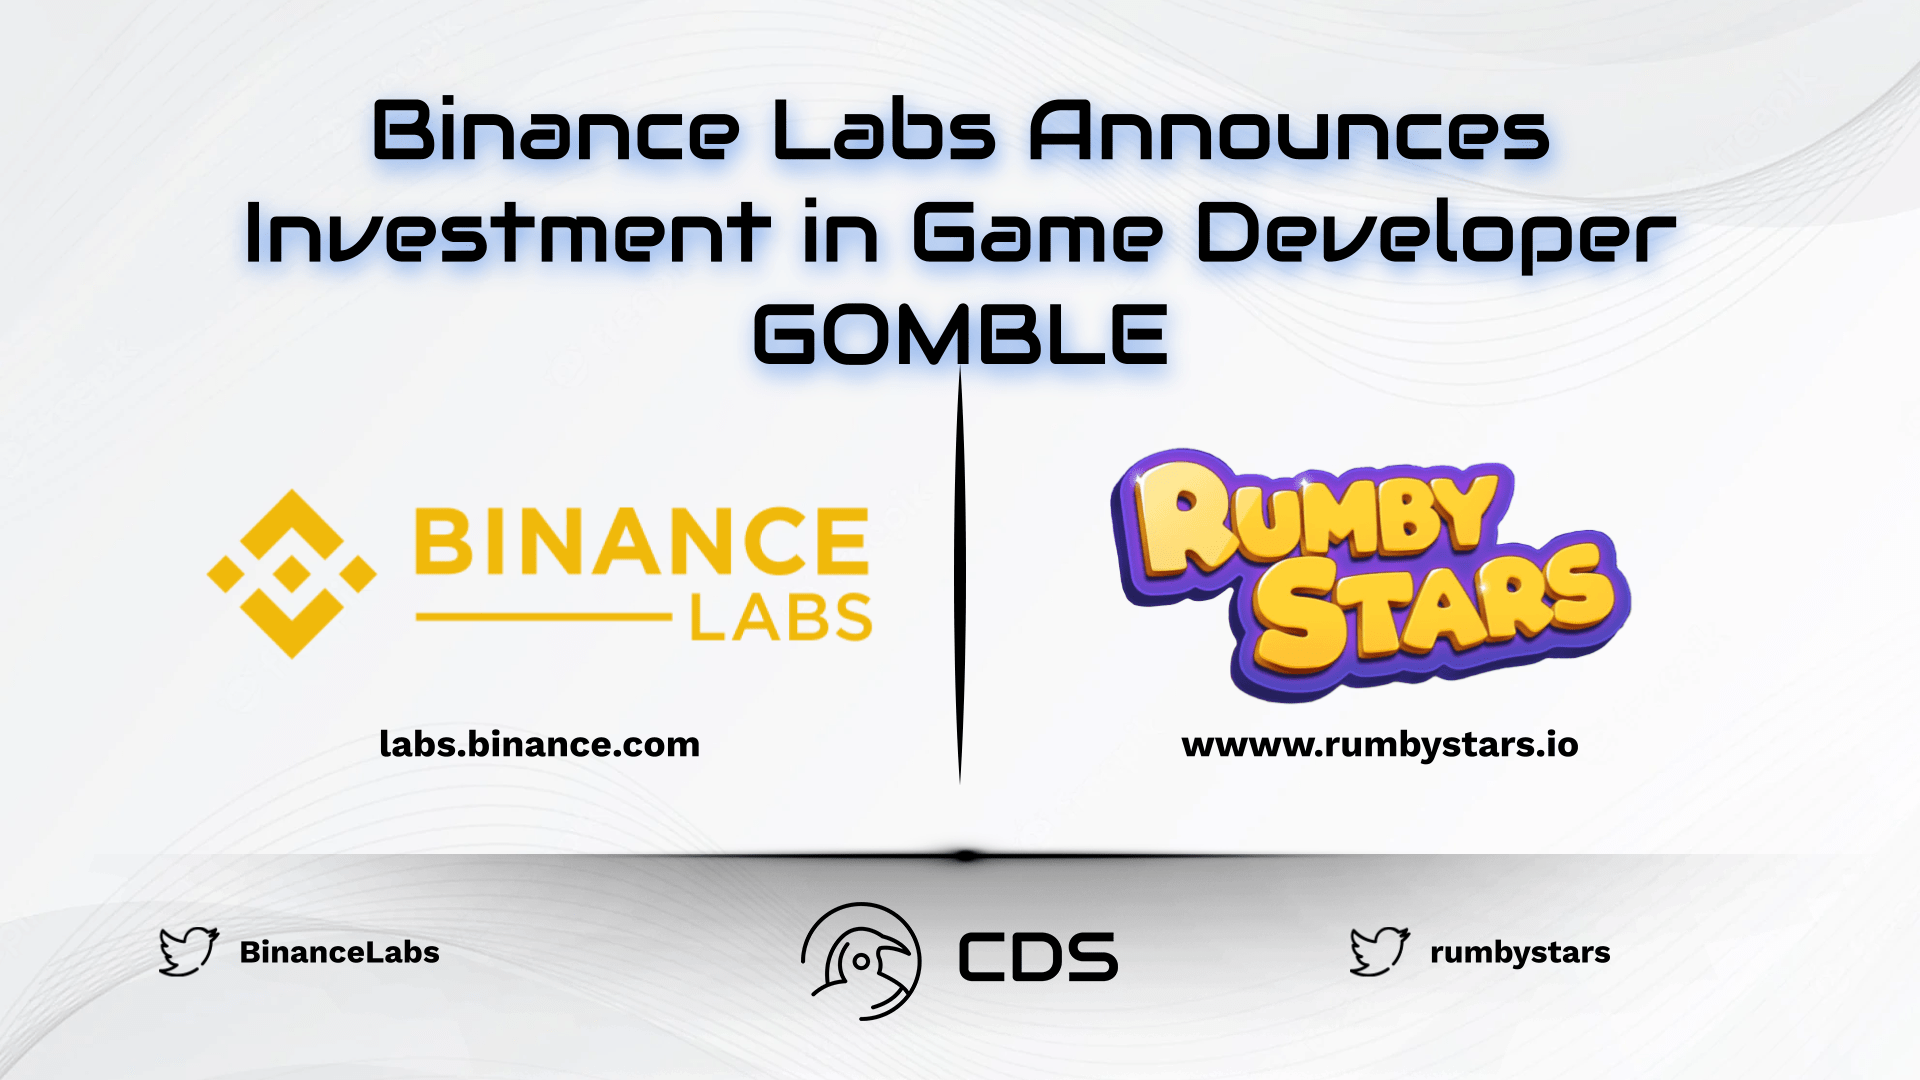 Binance Labs Announces Investment in Game Developer GOMBLE